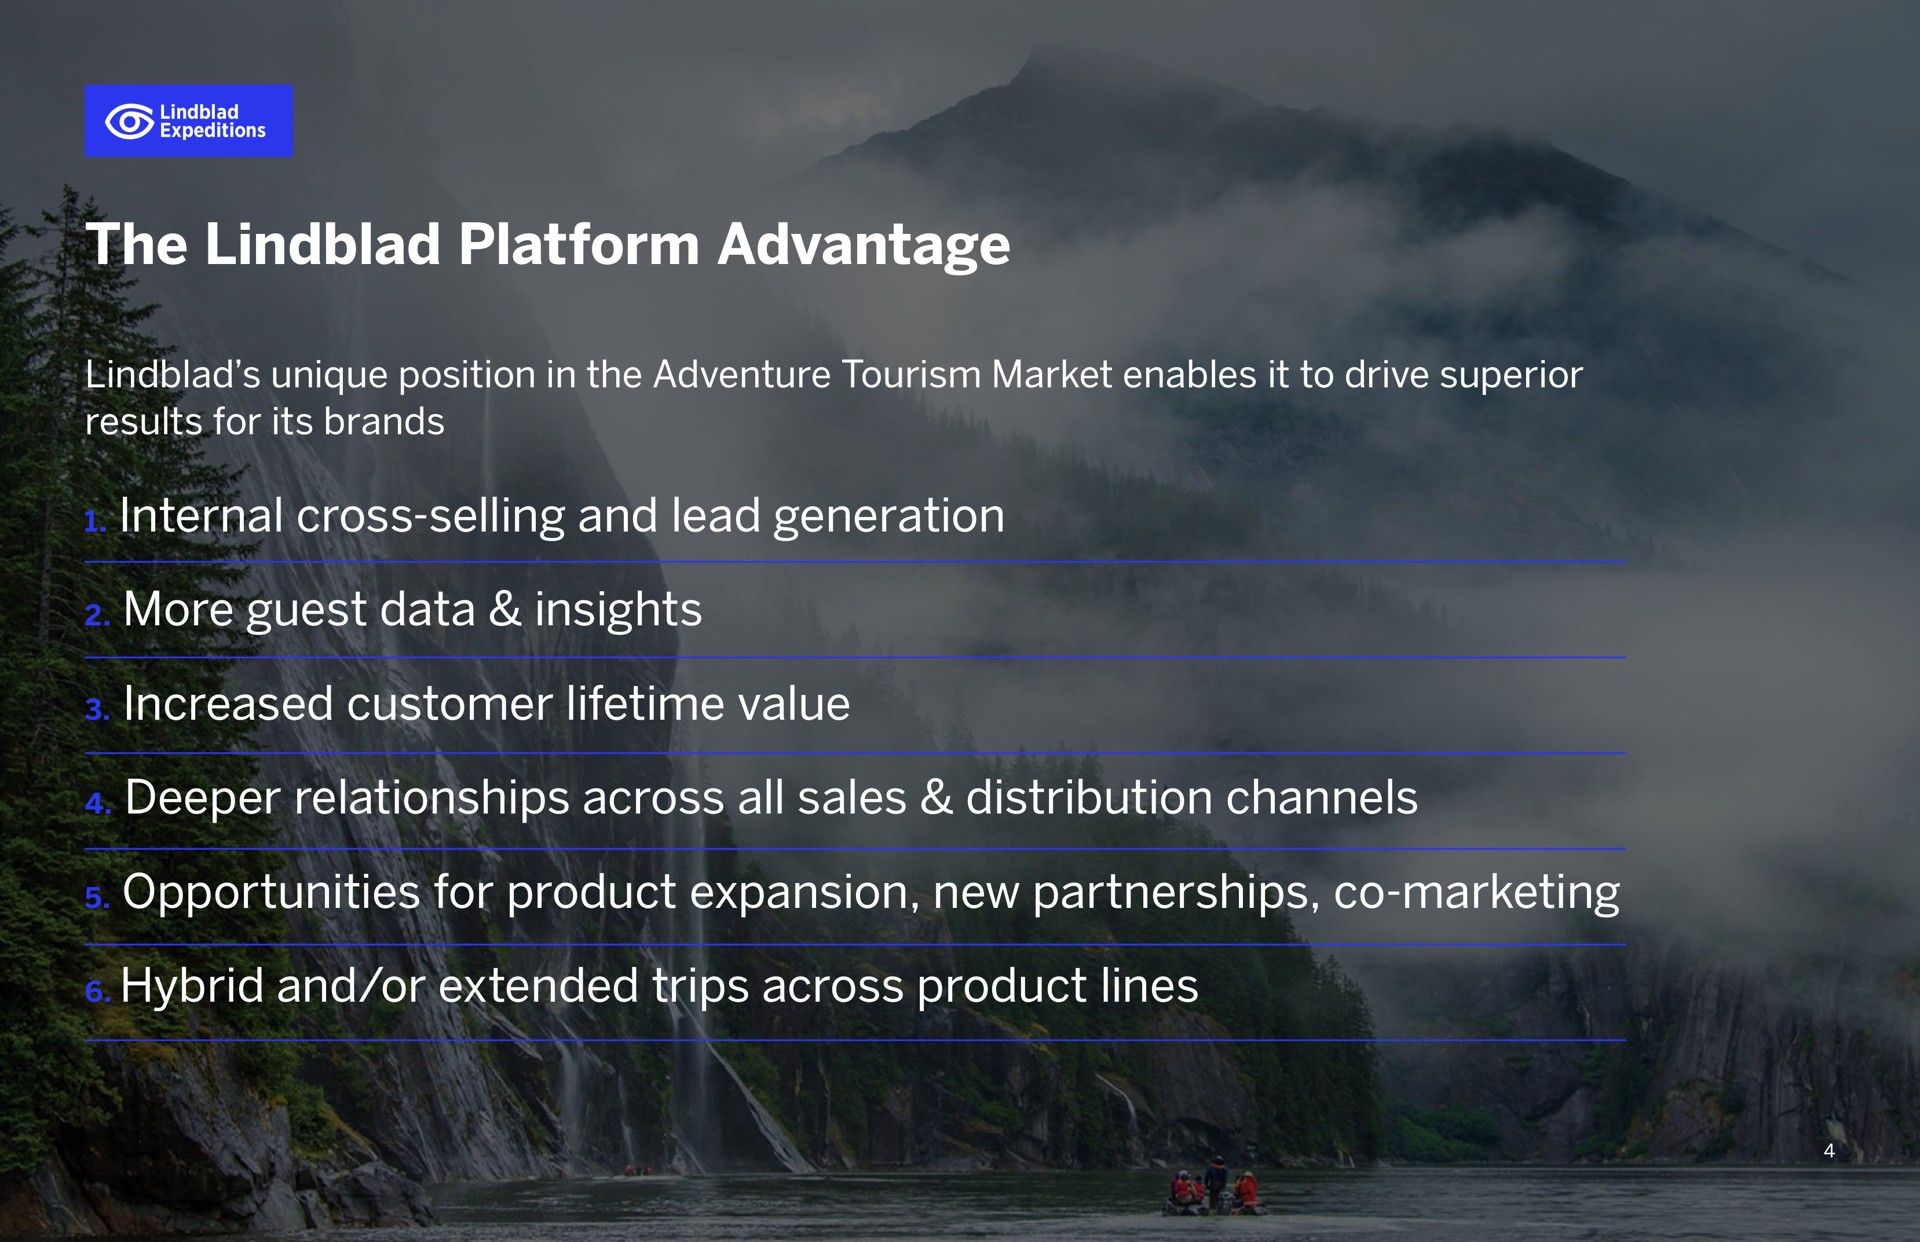 the platform advantage internal cross selling and lead generation more guest data insights increased customer lifetime value relationships across all sales distribution channels opportunities for product expansion new partnerships marketing hybrid and or extended trips across product lines | Lindblad